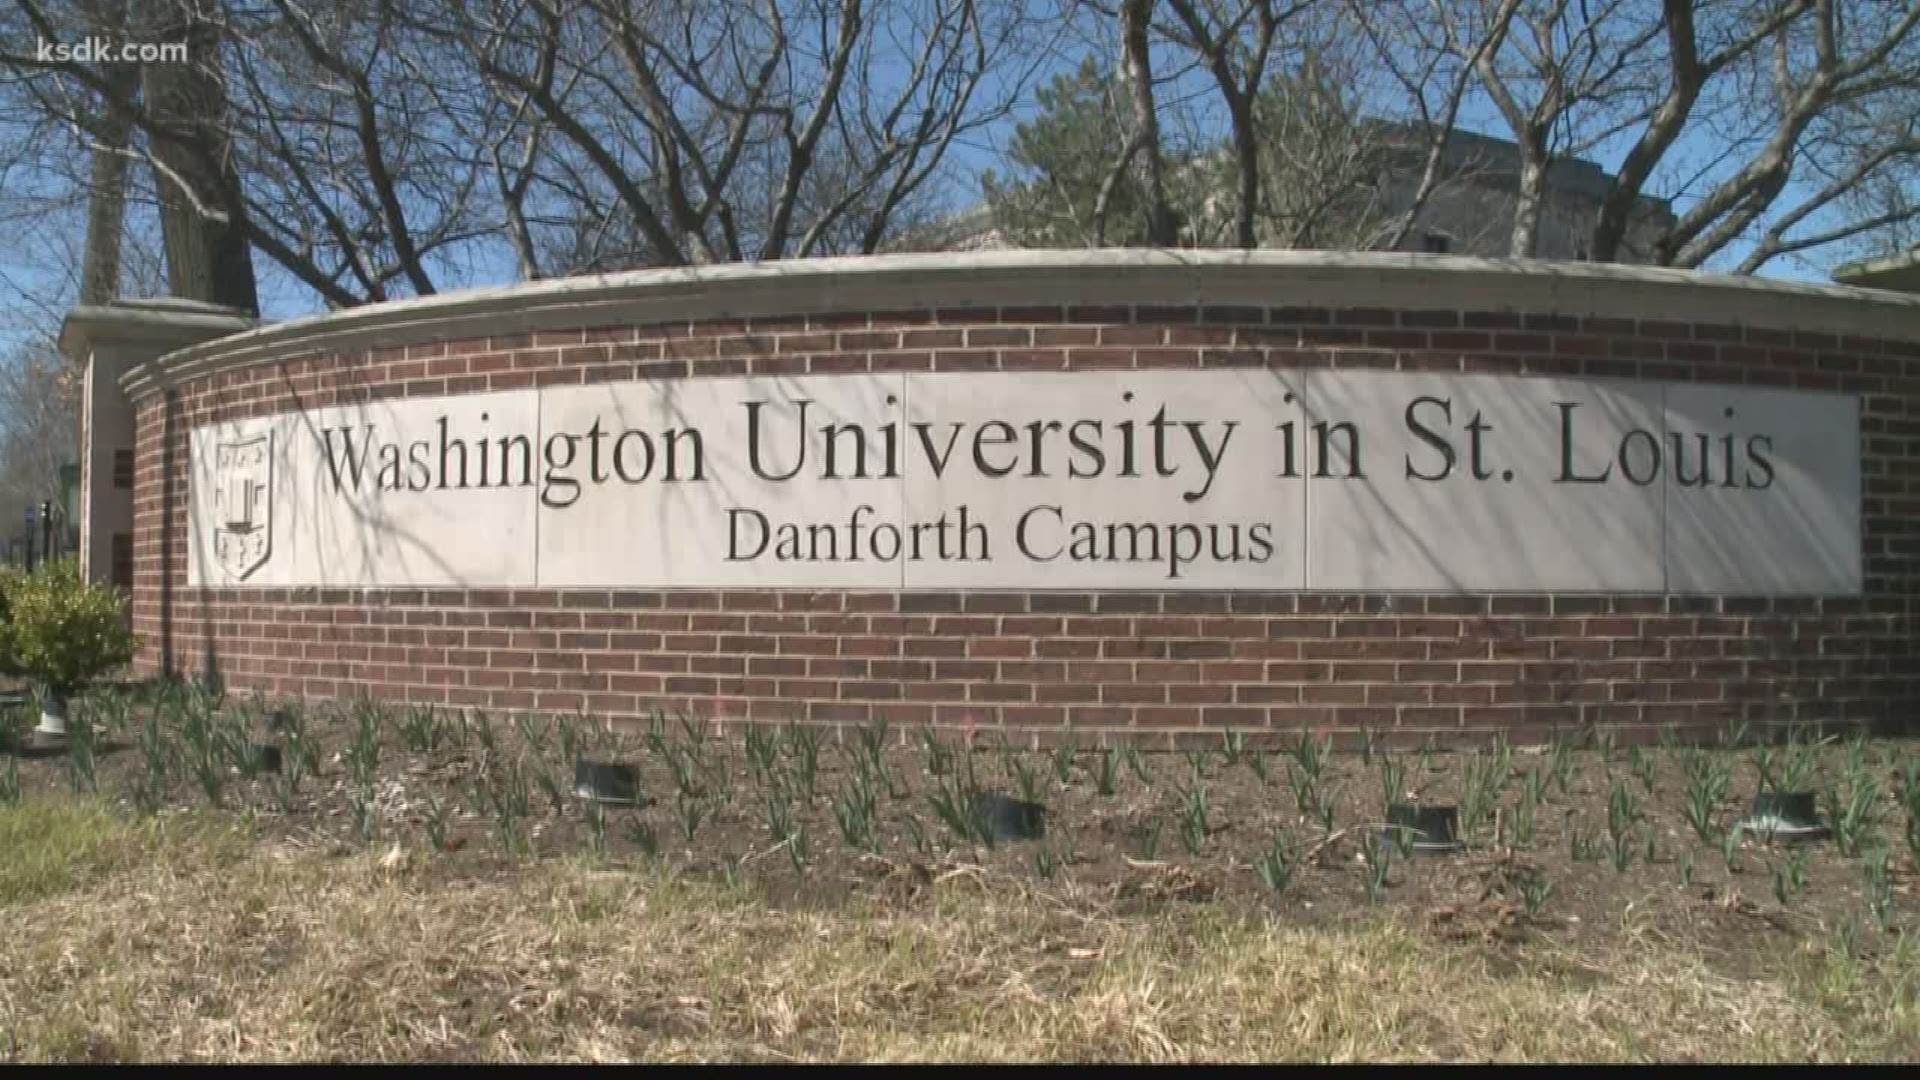 Local universities are taking anti-coronavirus measures, including a Washington University policy that forbids some students from returning to campus